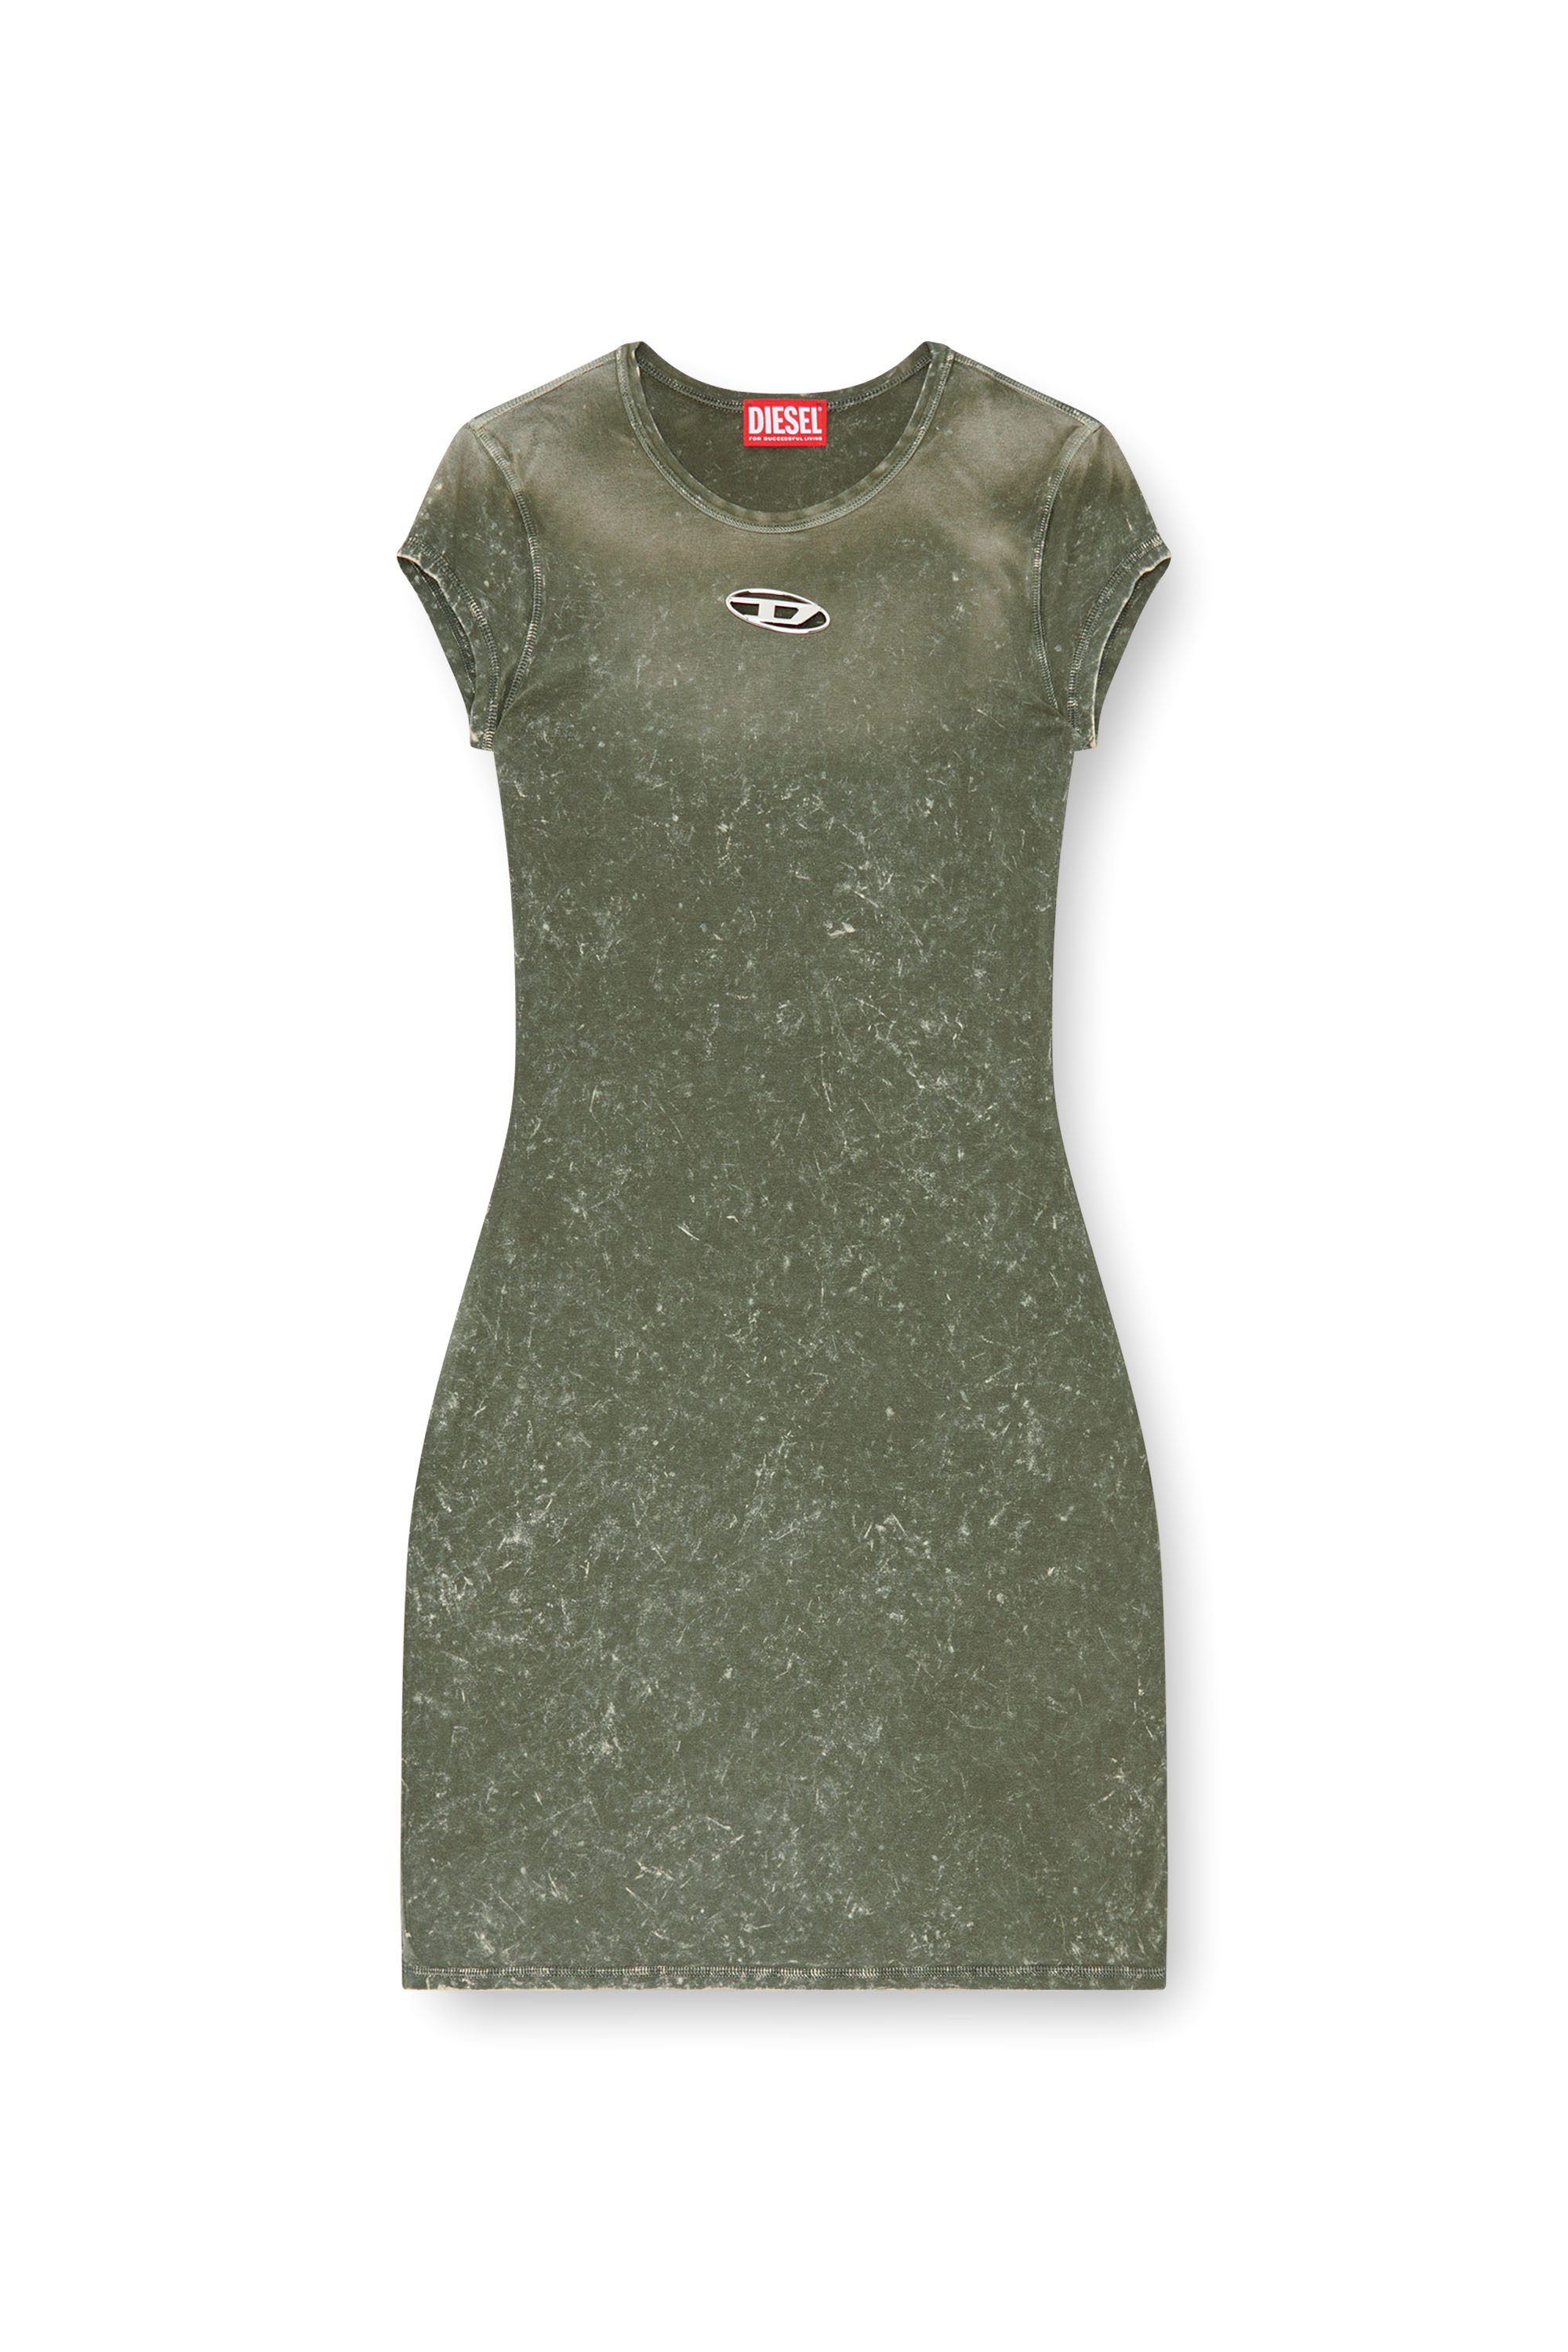 Diesel - D-ANGIEL-P1, Woman Short dress in marbled stretch jersey in Green - Image 3